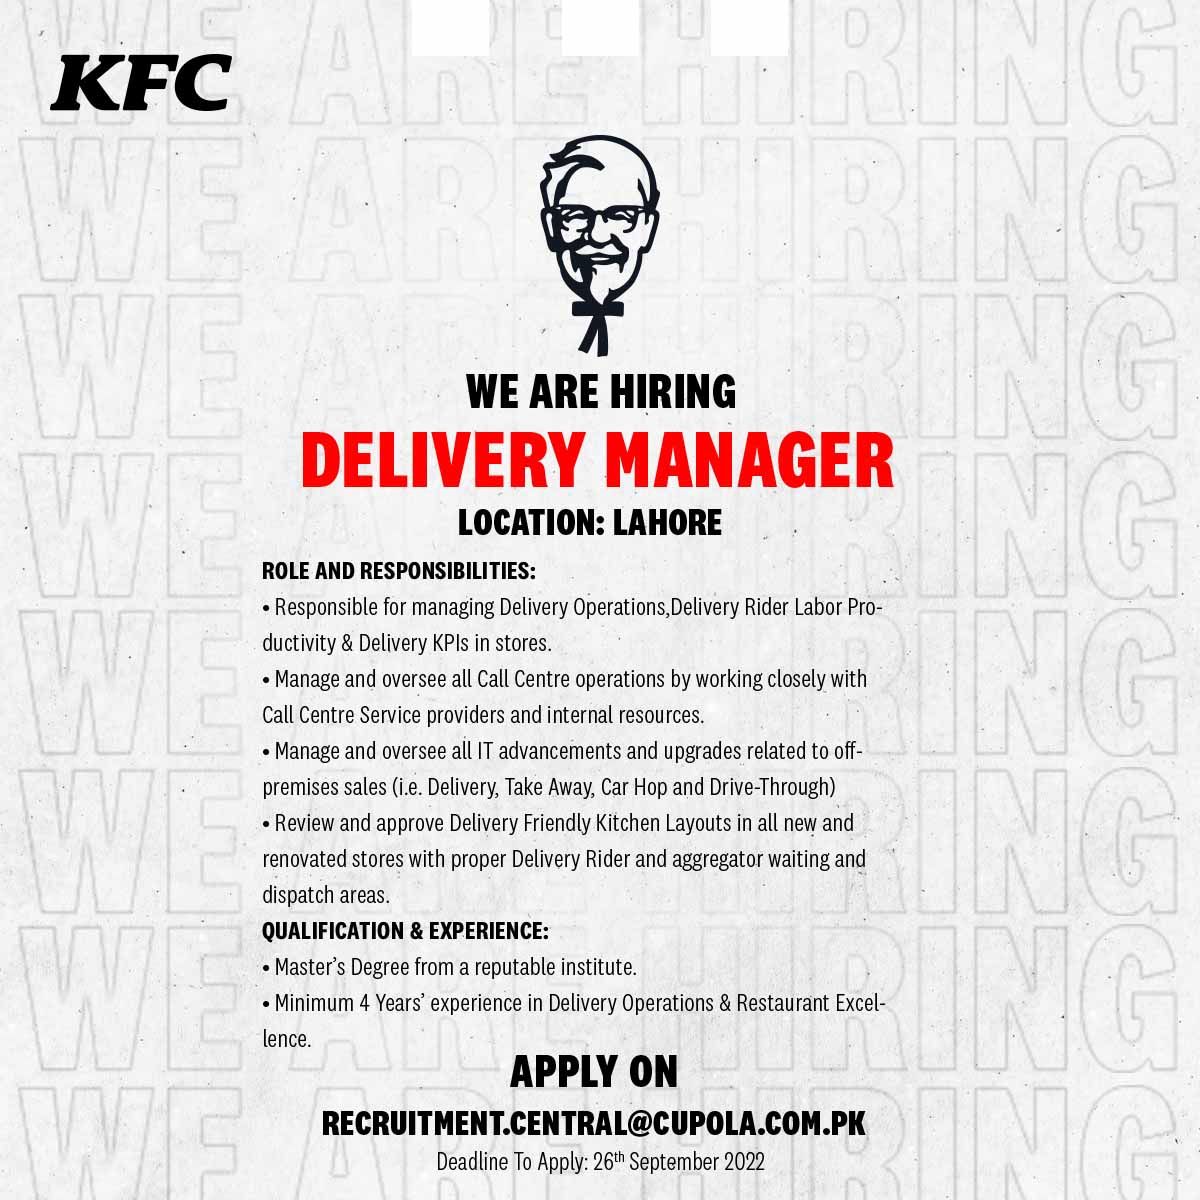 KFC Pakistan Jobs For Delivery Manager